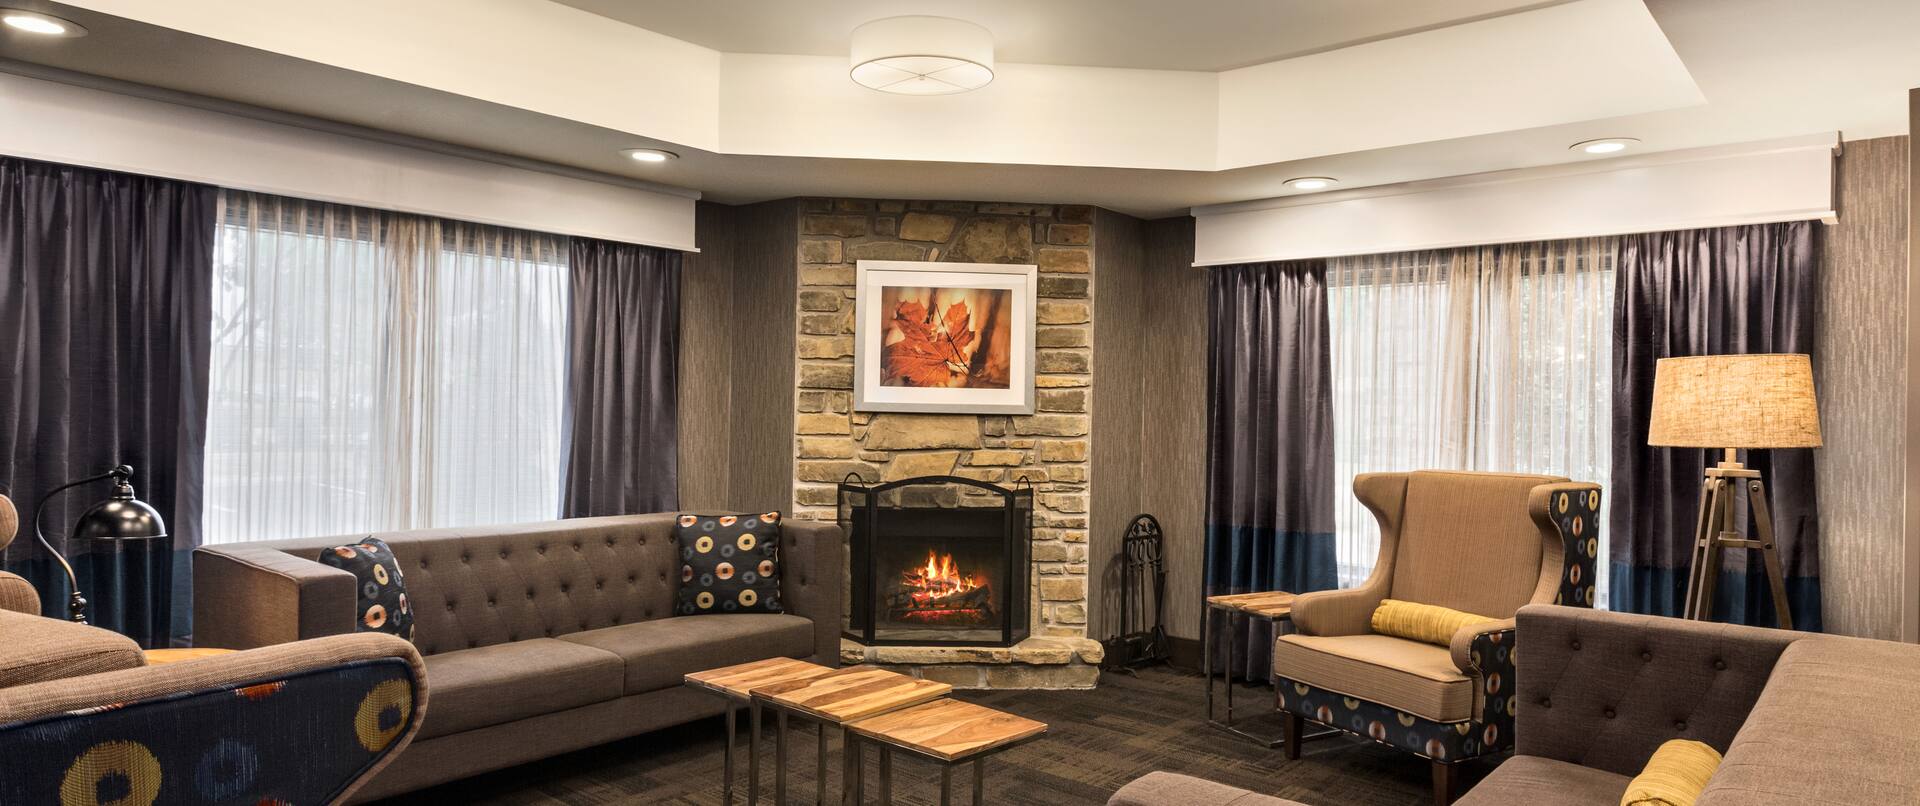 Lobby Seating Area with Sofas, Armchairs and Fireplace